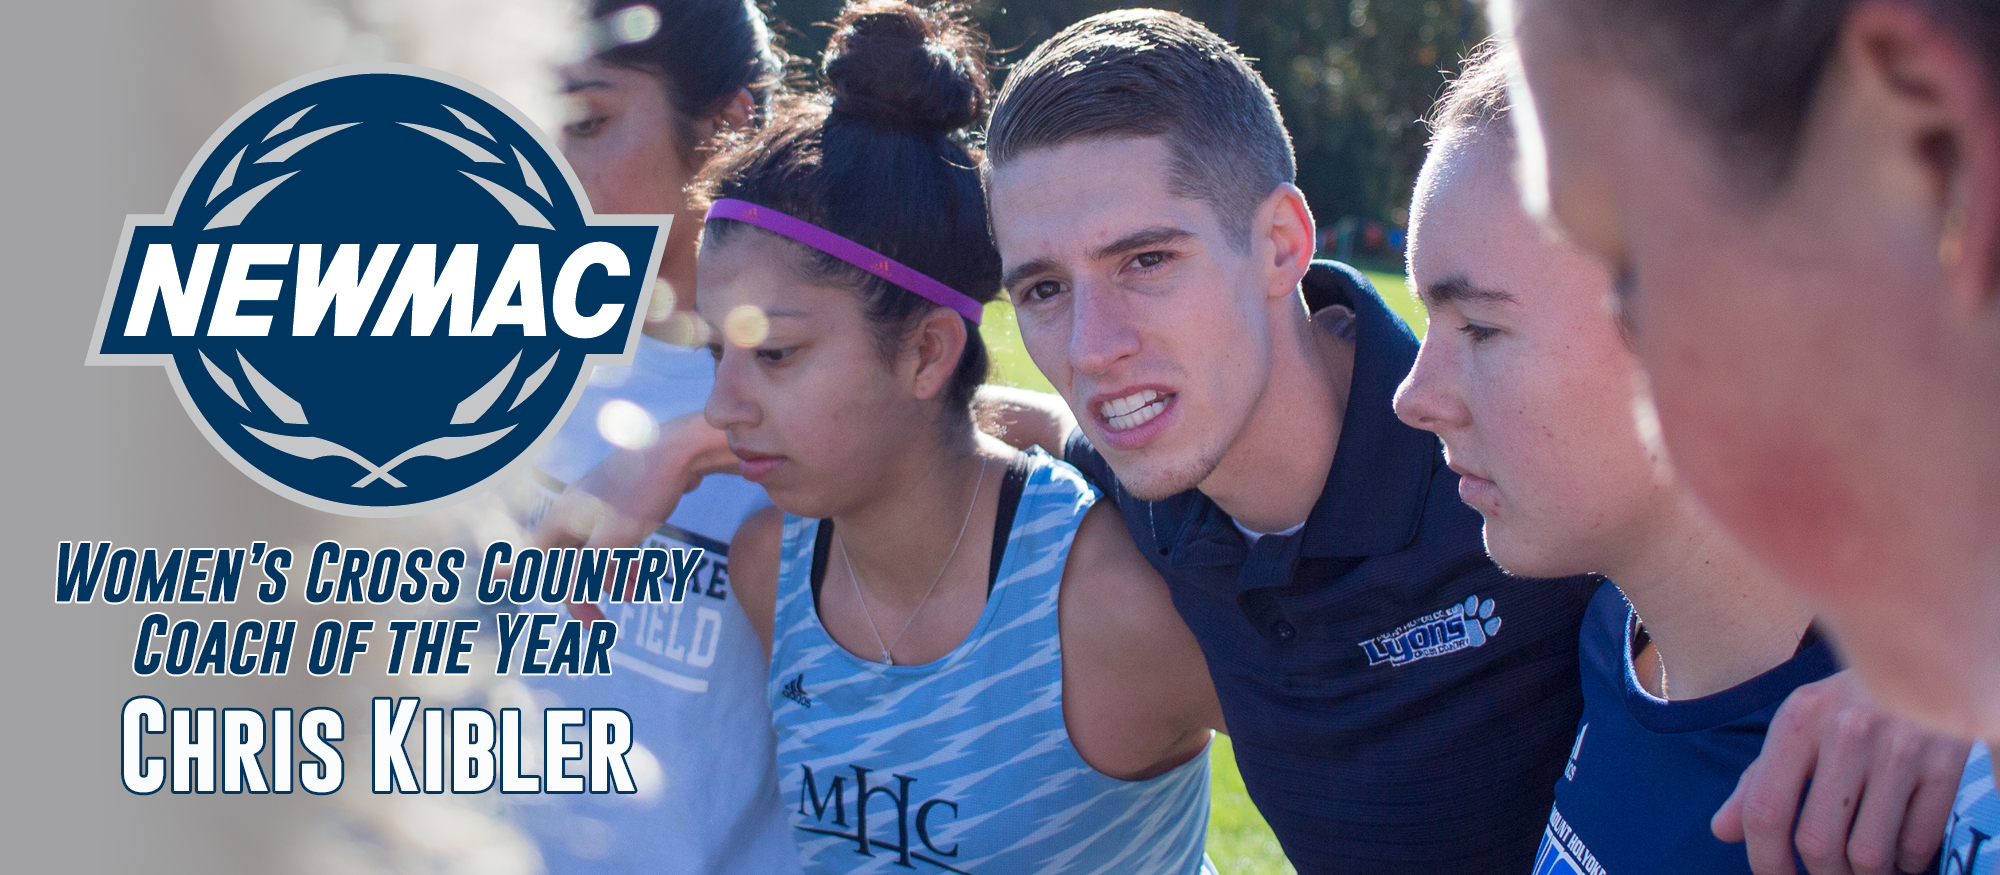 Kibler Earns NEWMAC Women's Cross Country Coach of the Year Honors